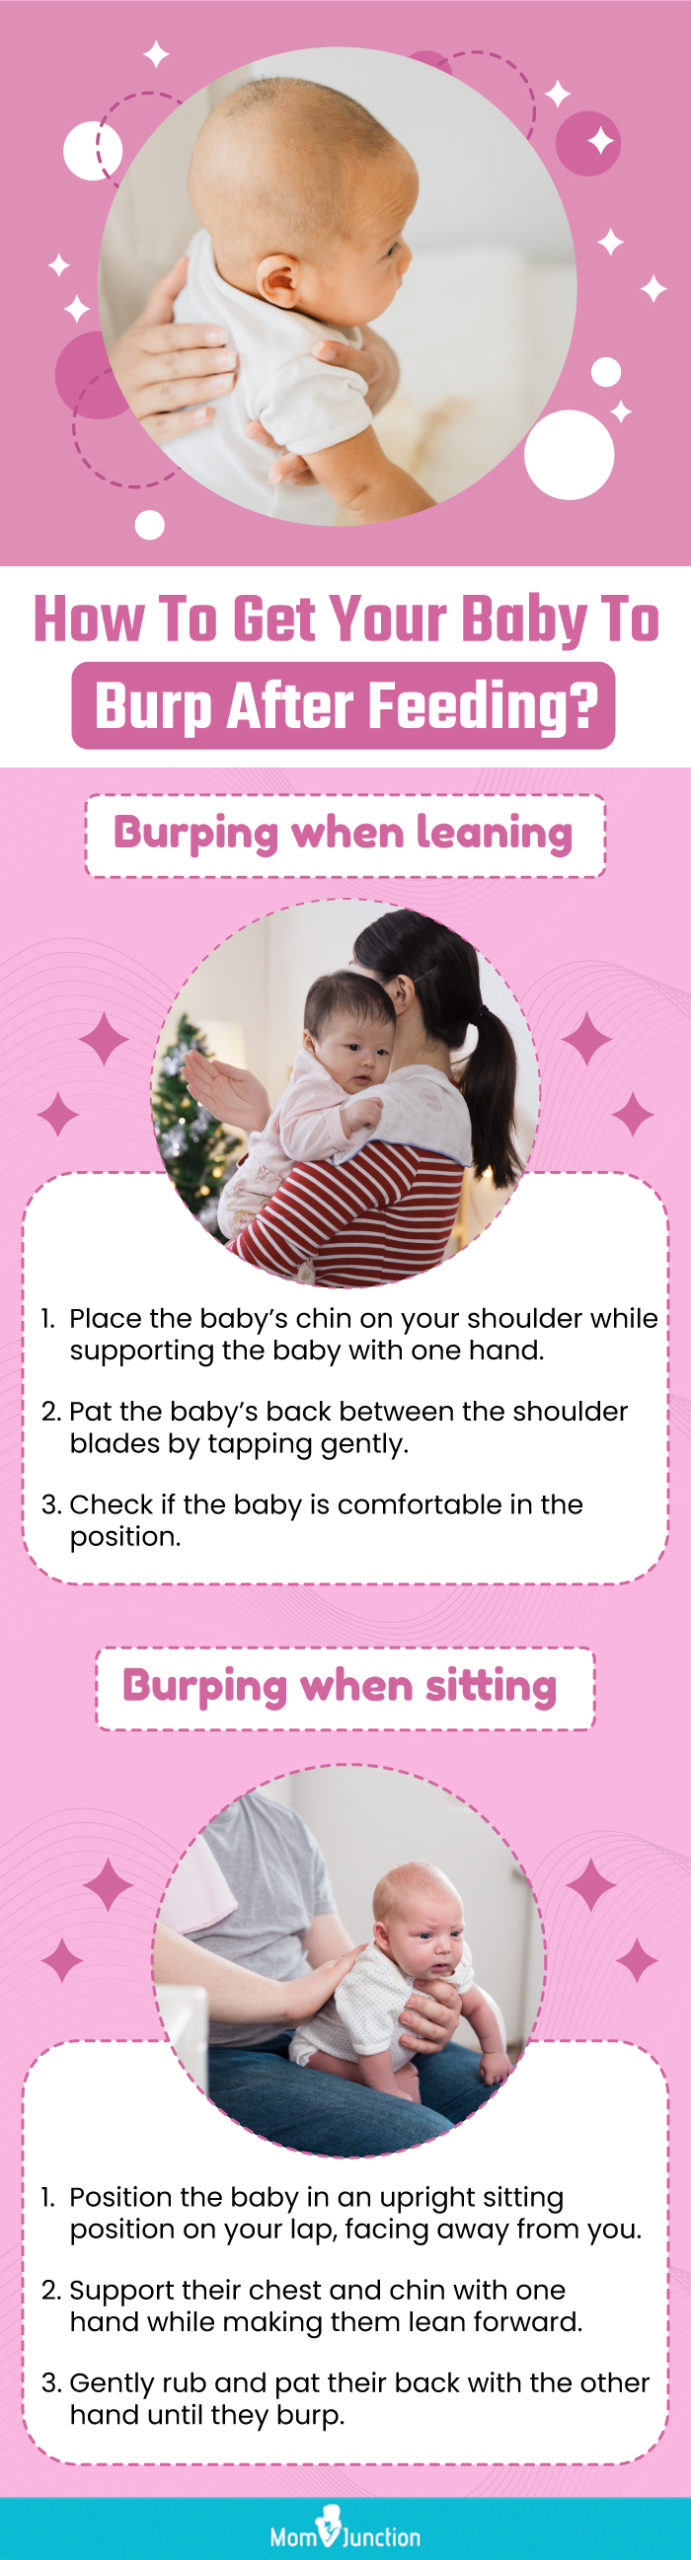 how to get your baby to burp after feeding (infographic)